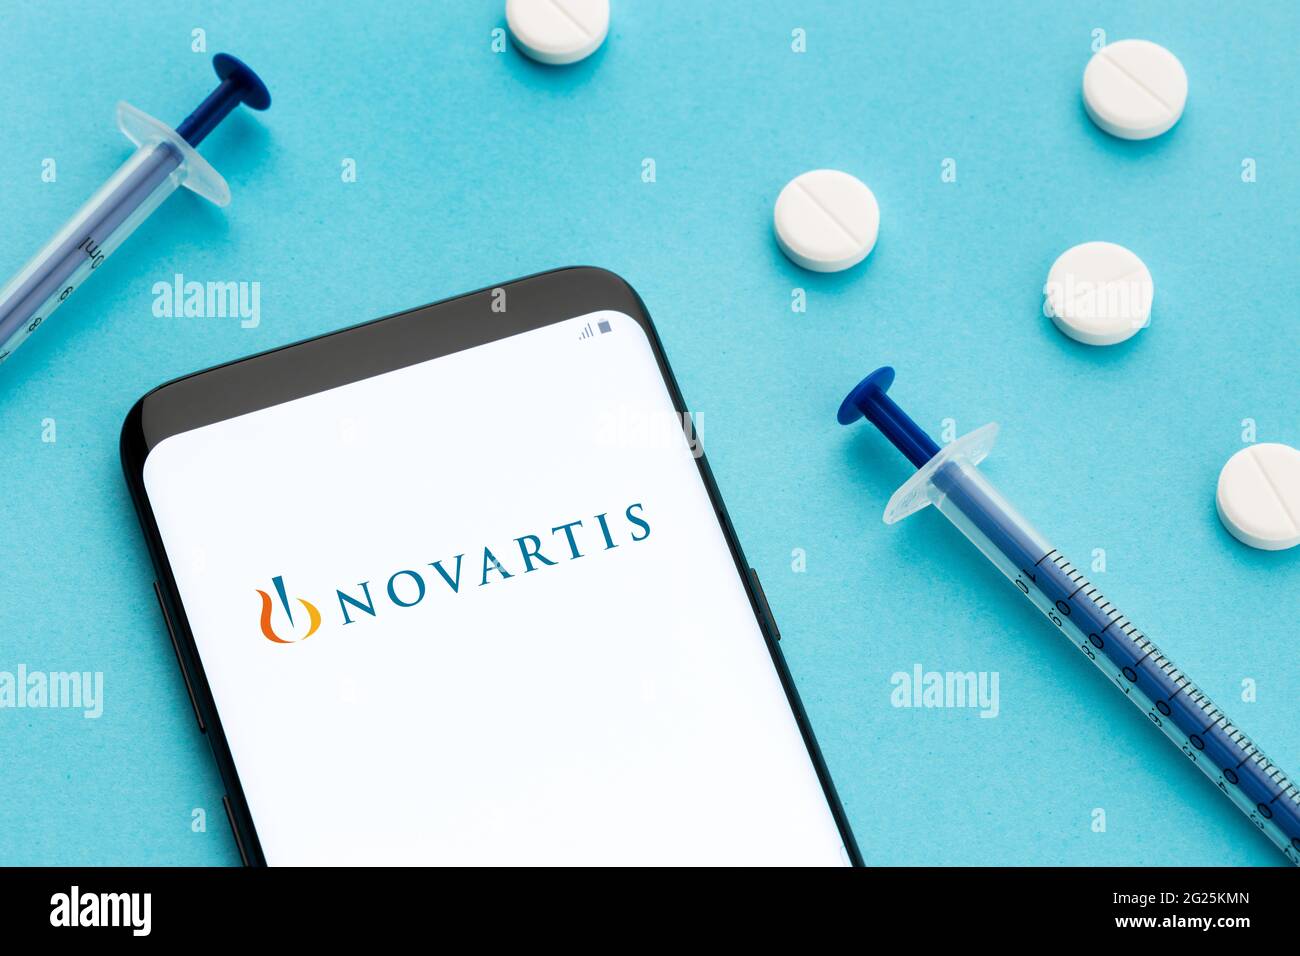 Galicia, Spain; June 8, 2020 : Smart phone showing Novartis logo on screen and pills and syringe on blue background Stock Photo